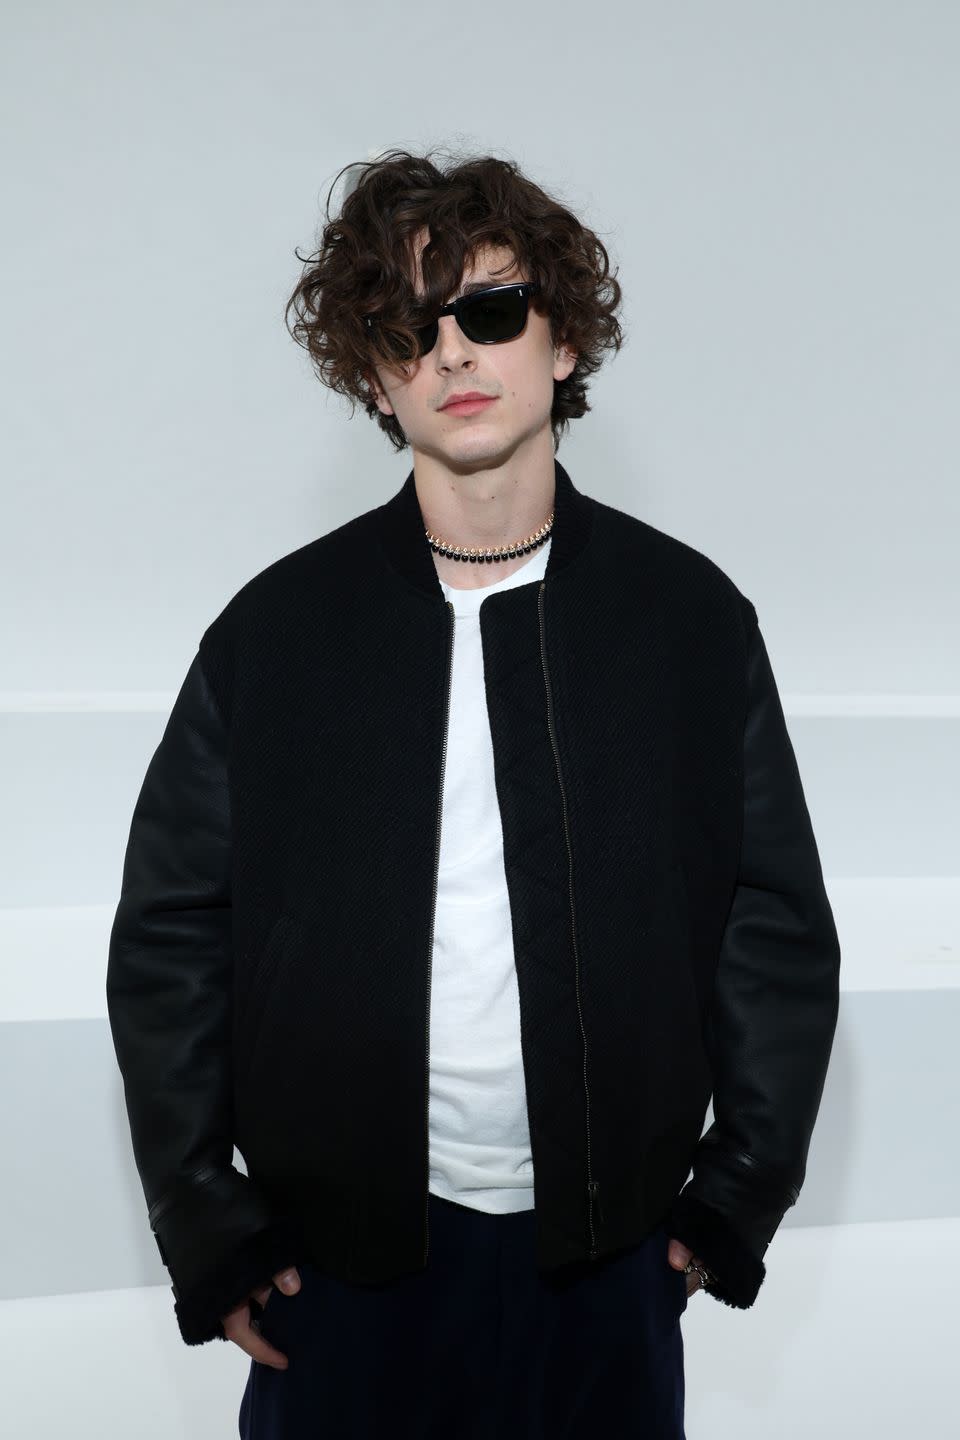 paris, france january 21 editorial use only for non editorial use please seek approval from fashion house timothee chalamet attends the loewe menswear fall winter 2023 2024 show as part of paris fashion week on january 21, 2023 in paris, france photo by pascal le segretaingetty images